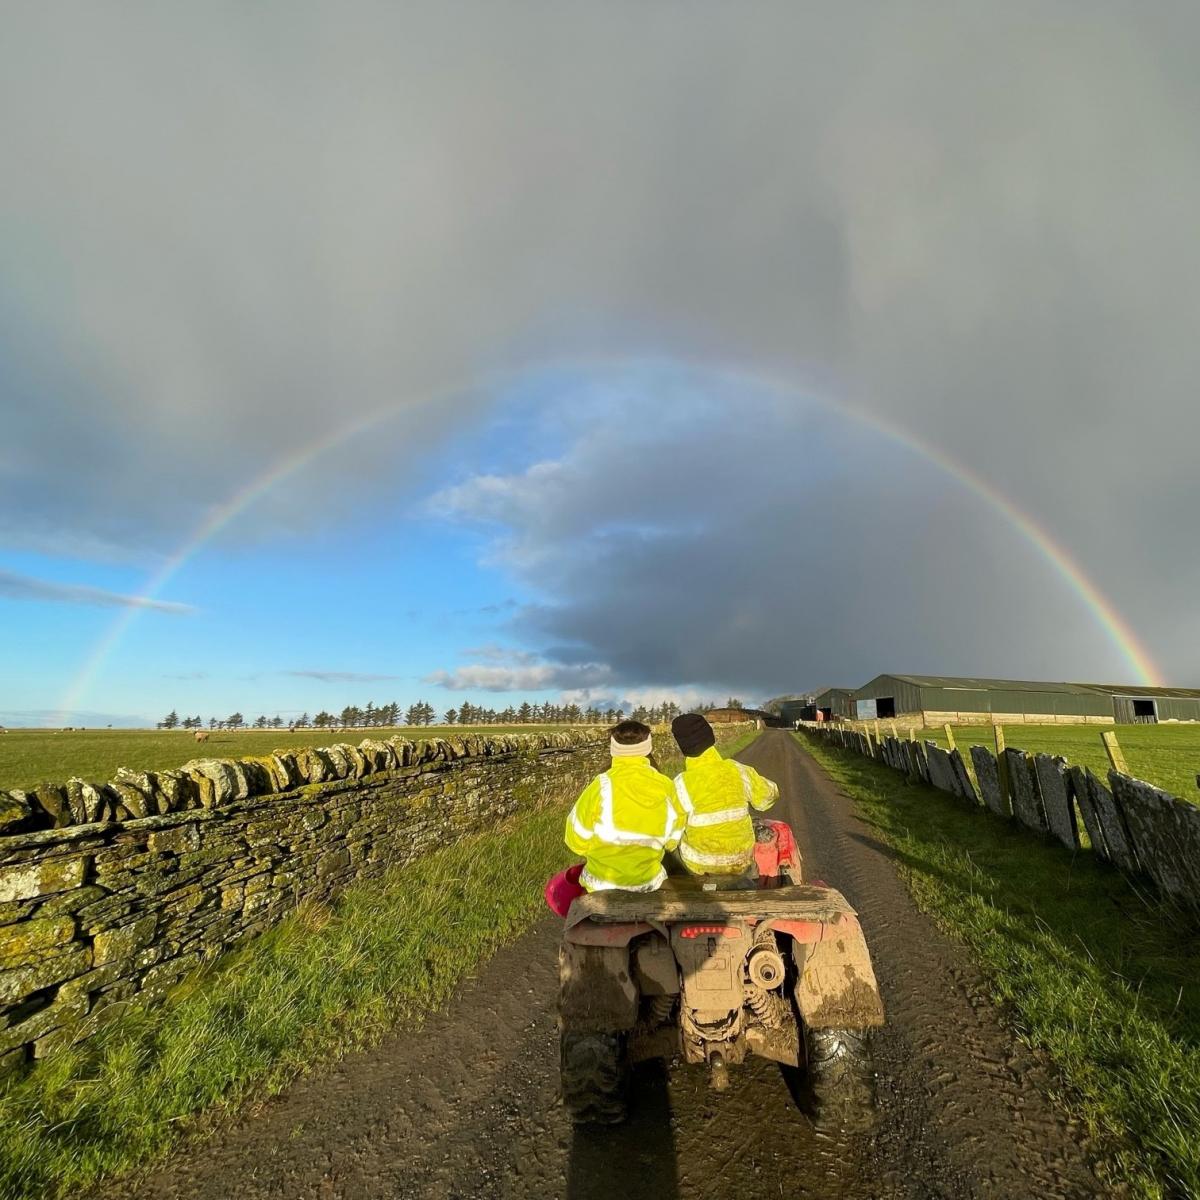 Christine Campbell - Ross & Ailsa Campbell from Bardnaclavan Farm, Caithness captured under a spontaneous rainbow bringing hope, happiness and joy to all